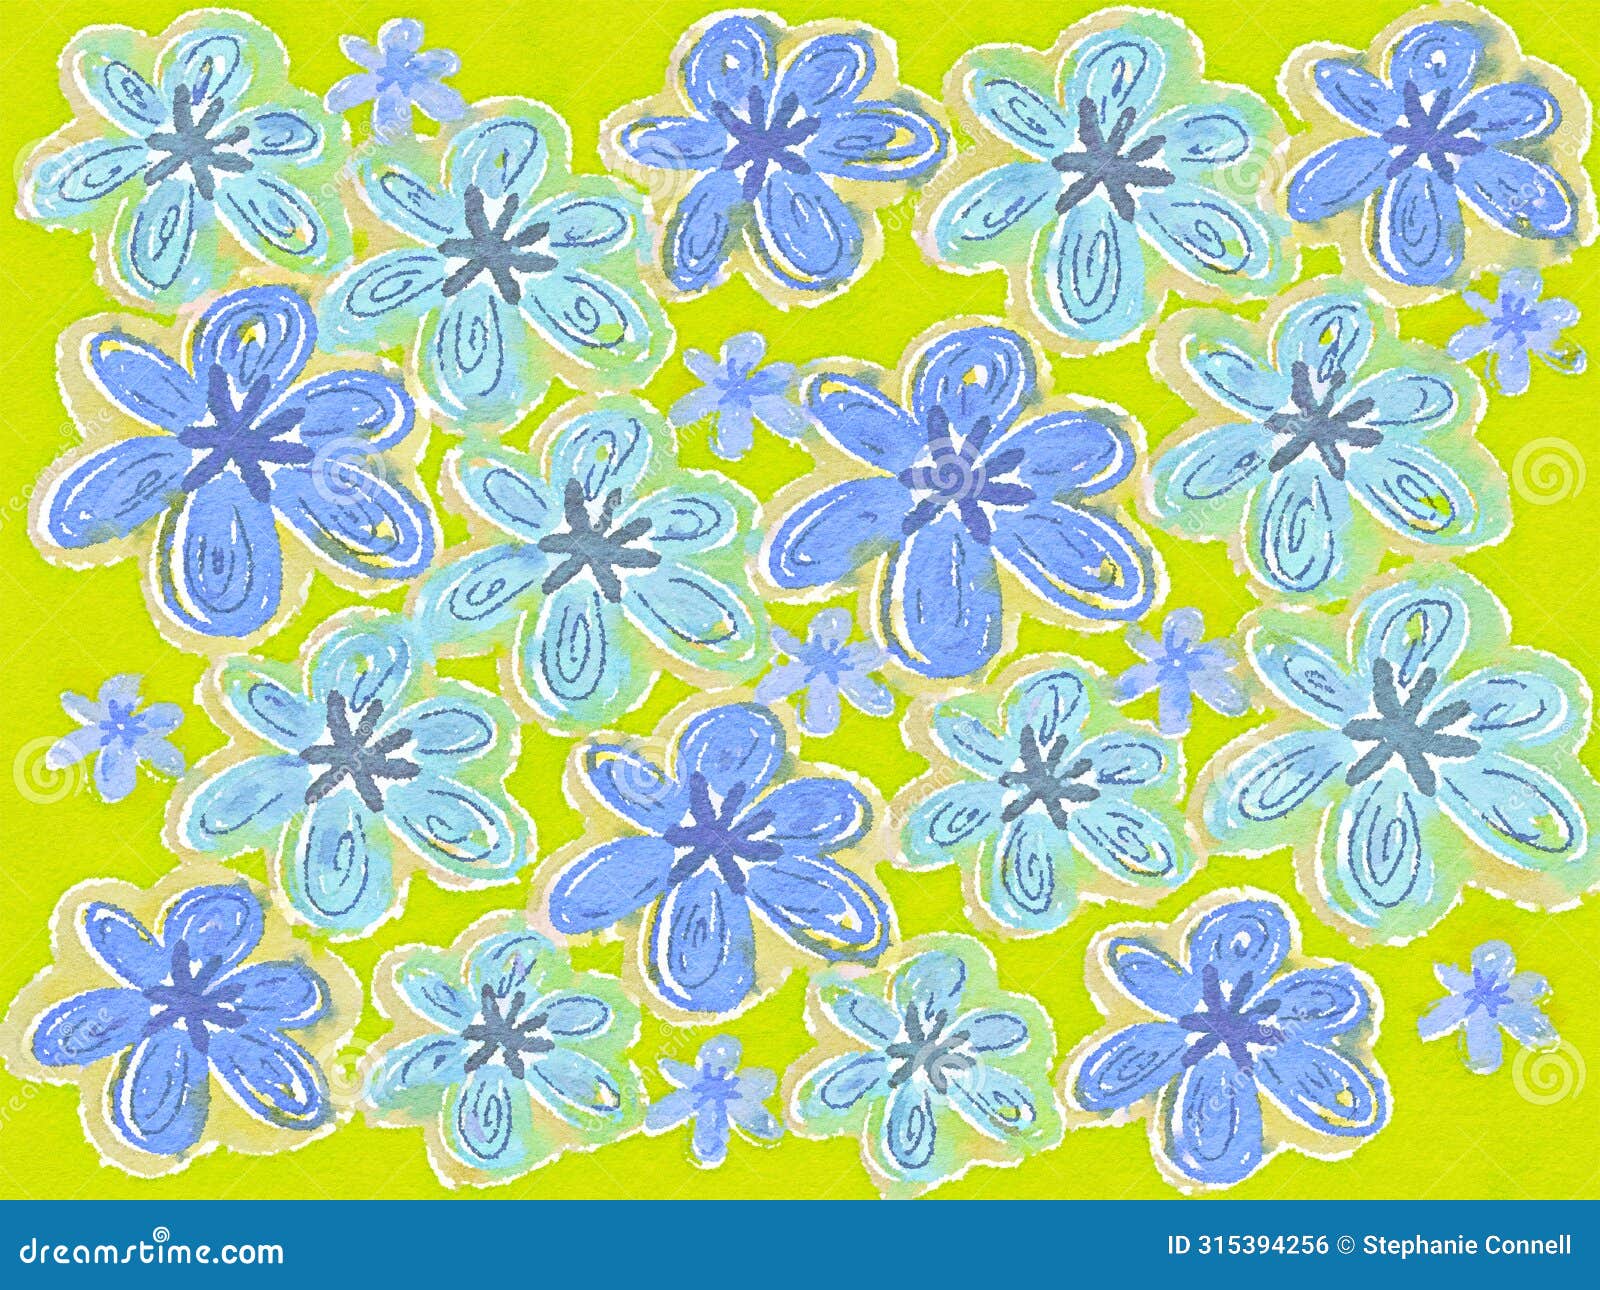 blue and yellow watercolor floral , handpainted flower pattern wallpaper